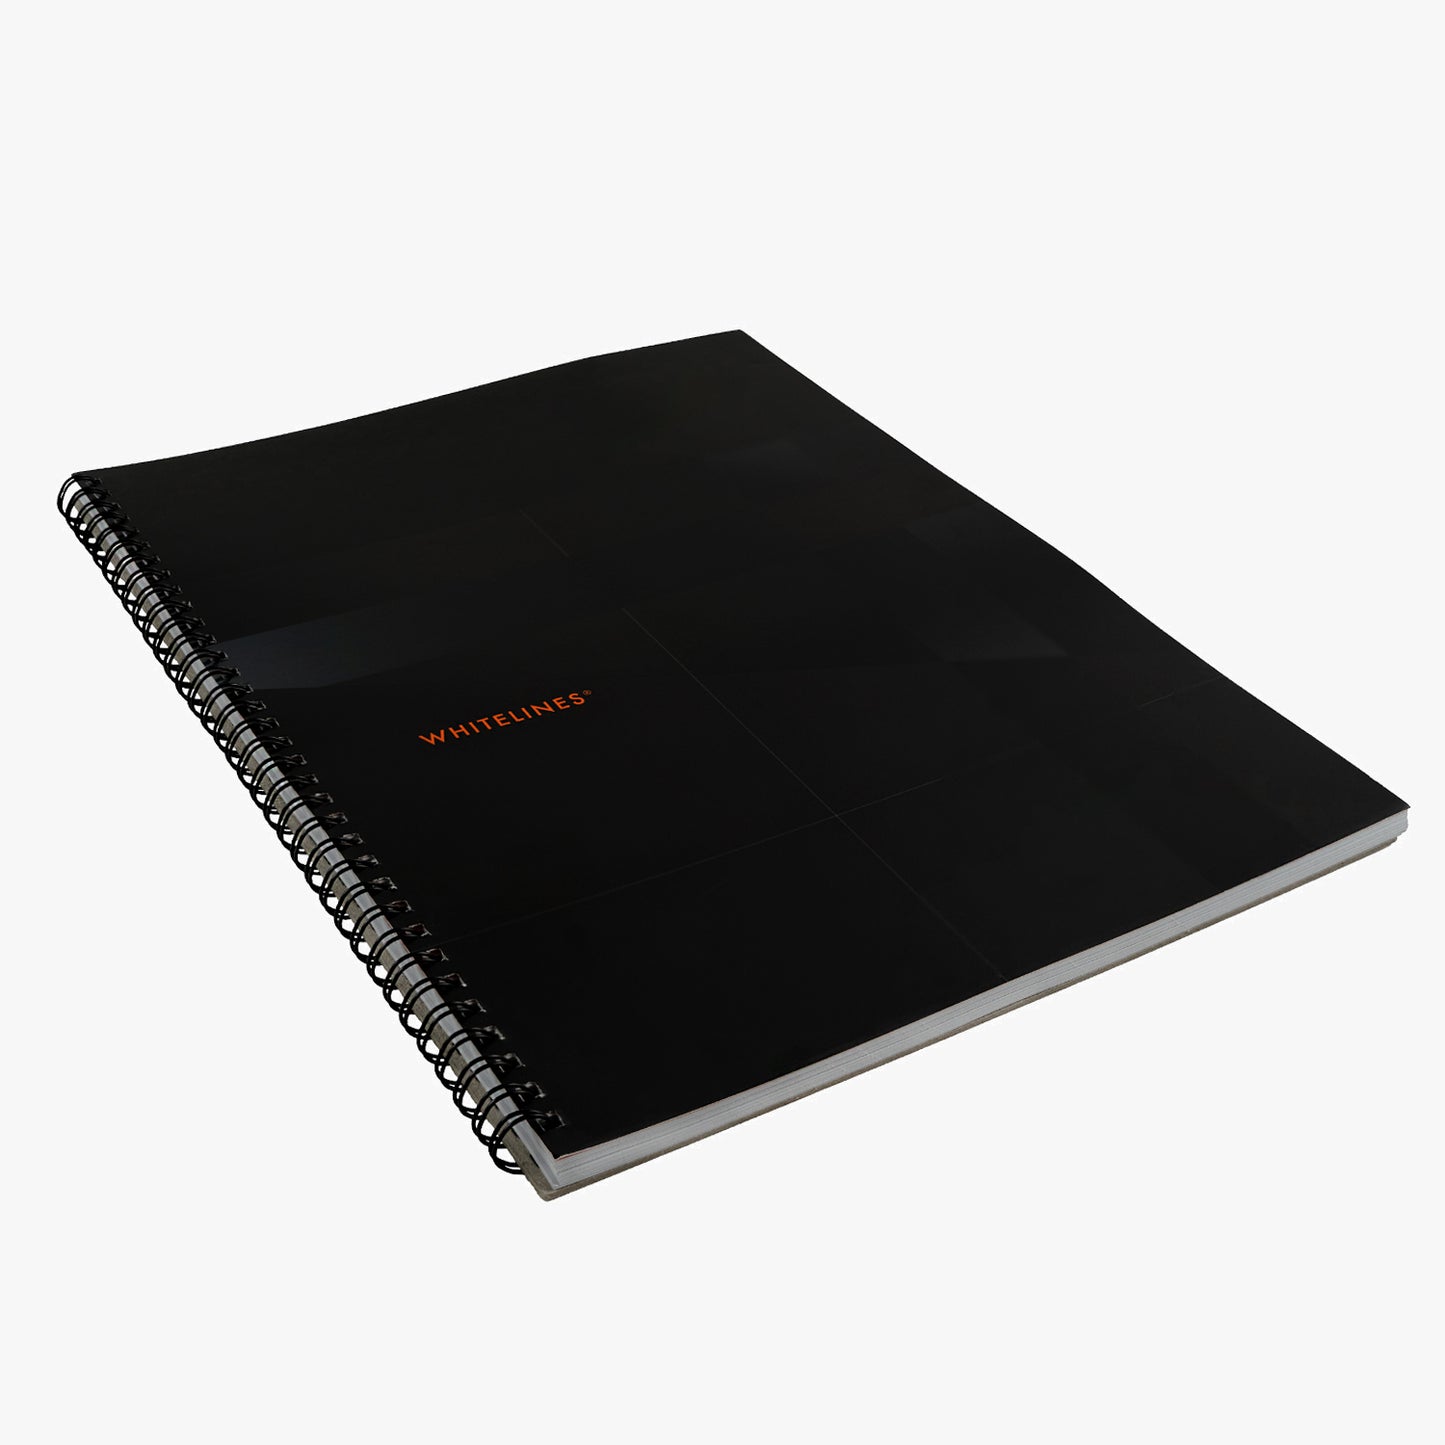 A4 size whitelines notebook with dark cover.